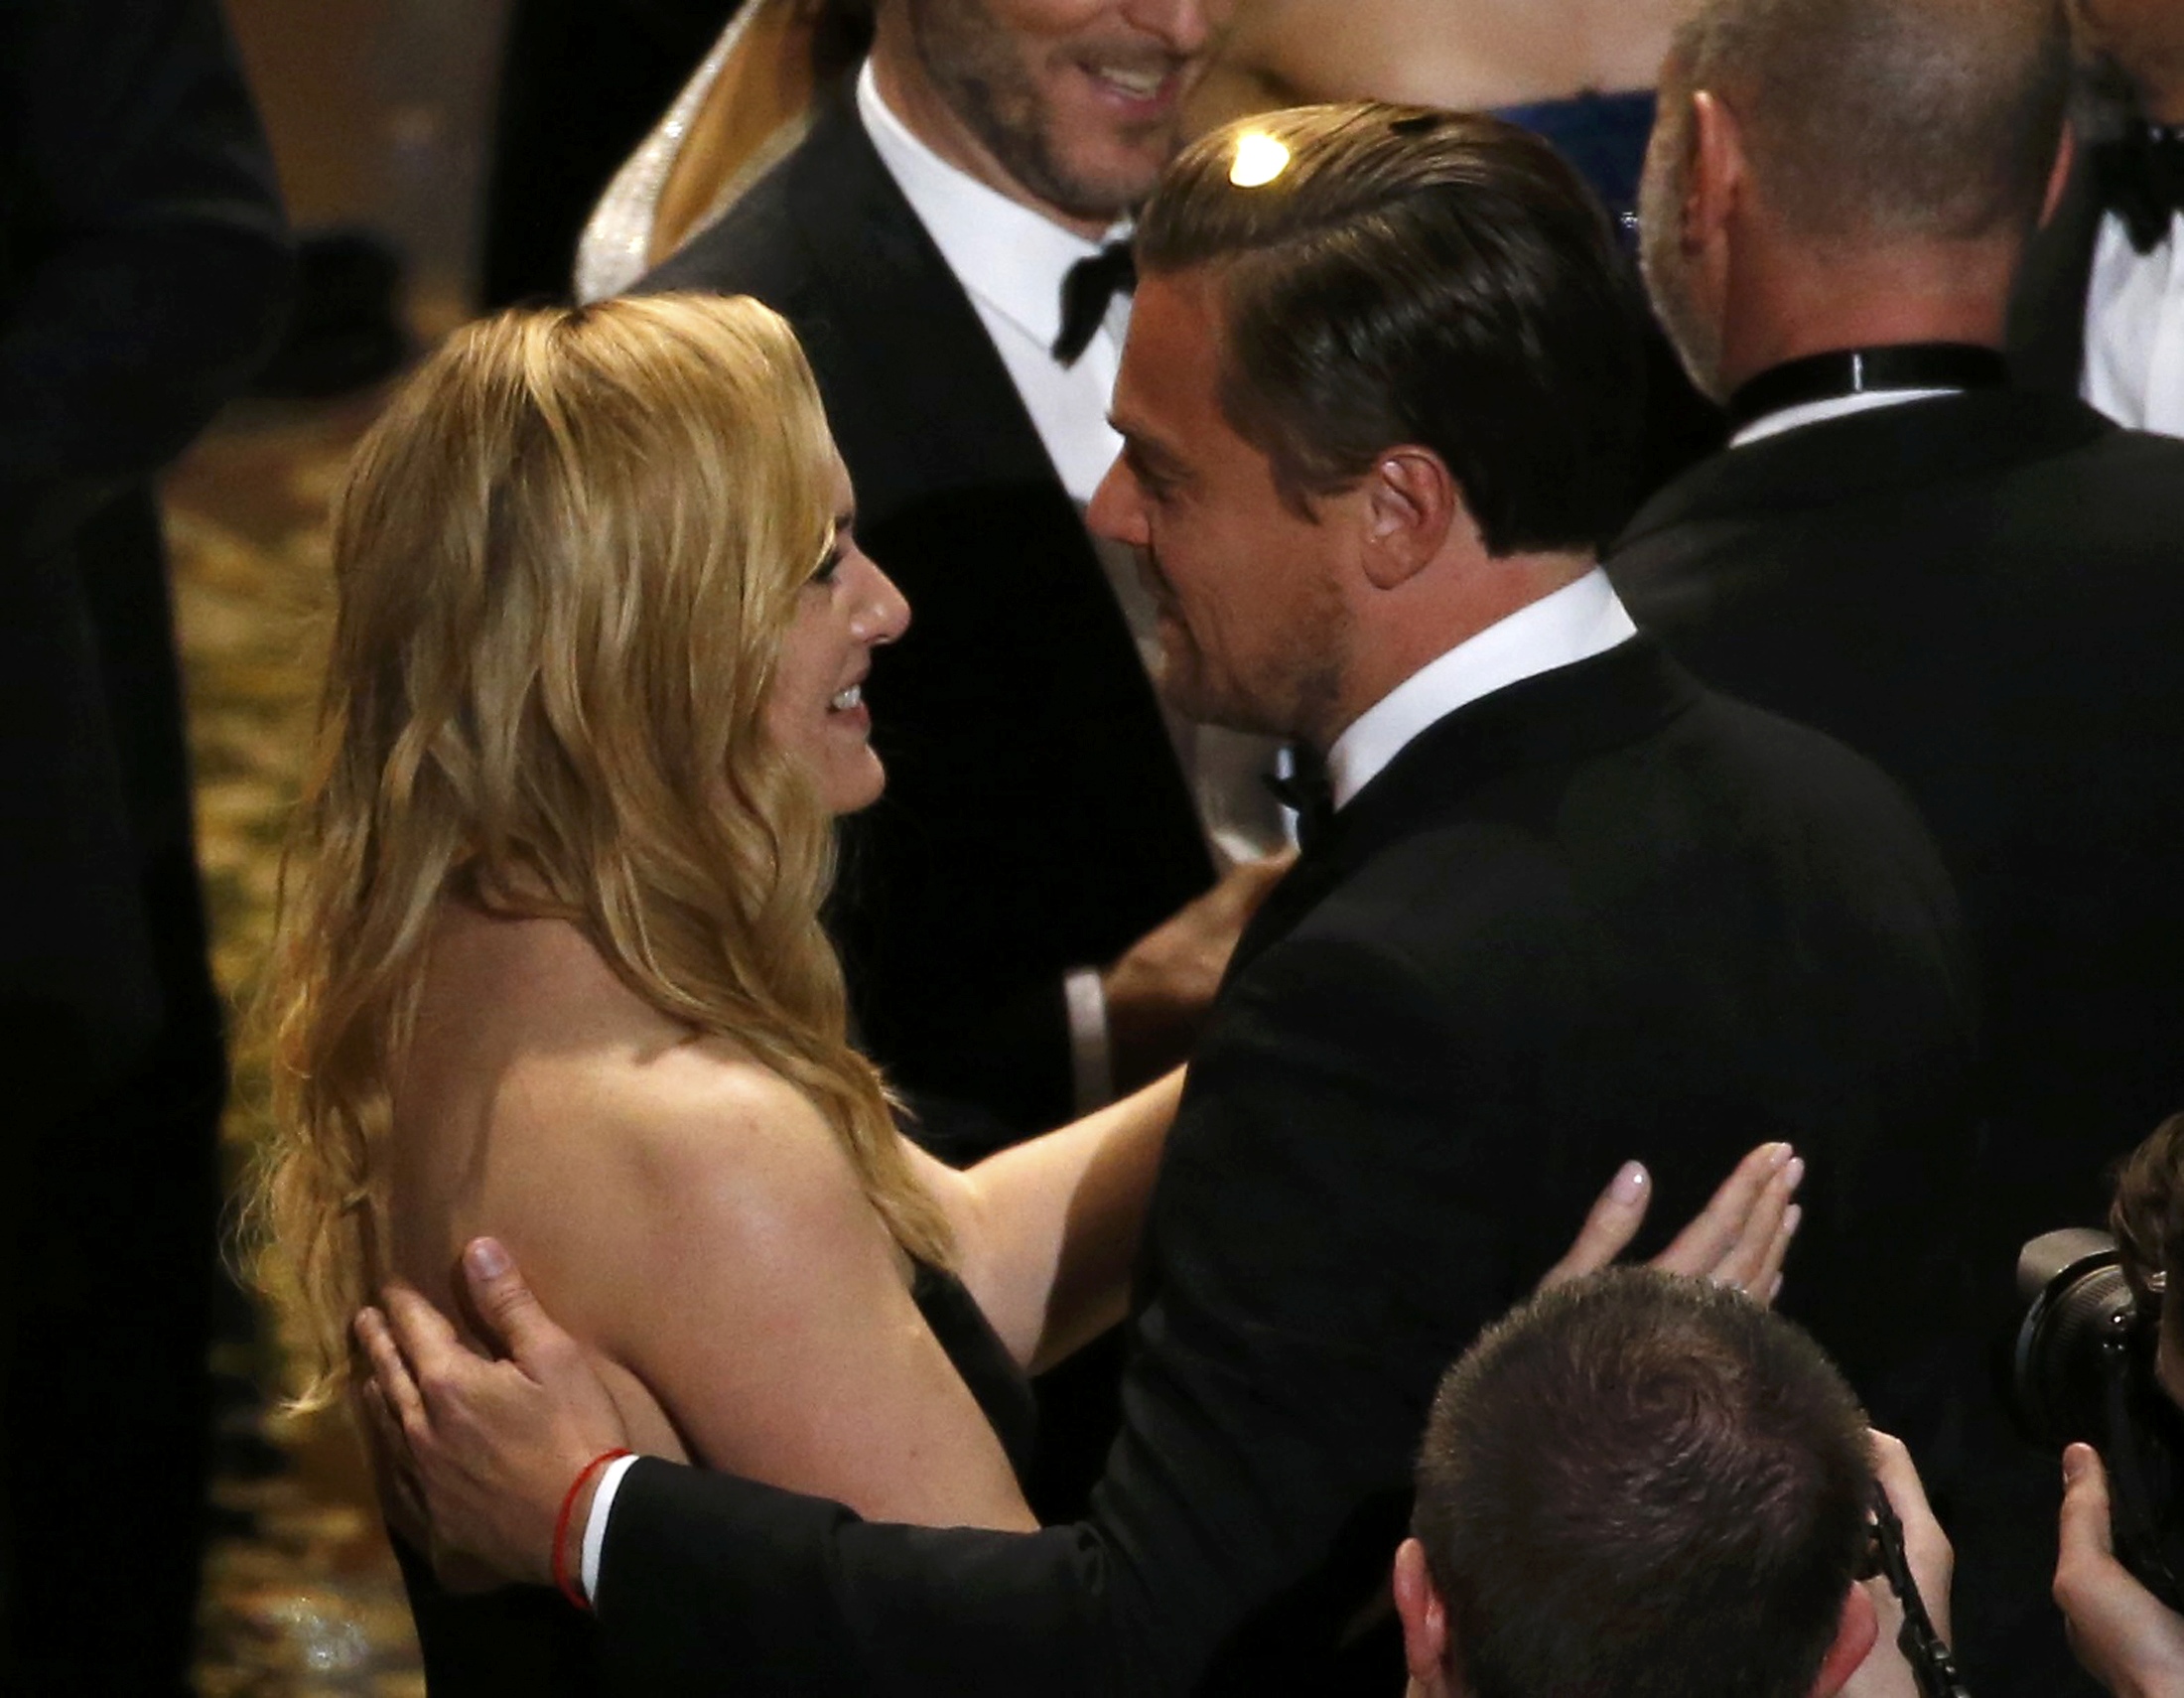 Leonardo DiCaprio and Kate Winslet (L) talk after the end of the award ceremony at the 88th Academy Awards in Hollywood, California February 28, 2016.   REUTERS/Mario Anzuoni